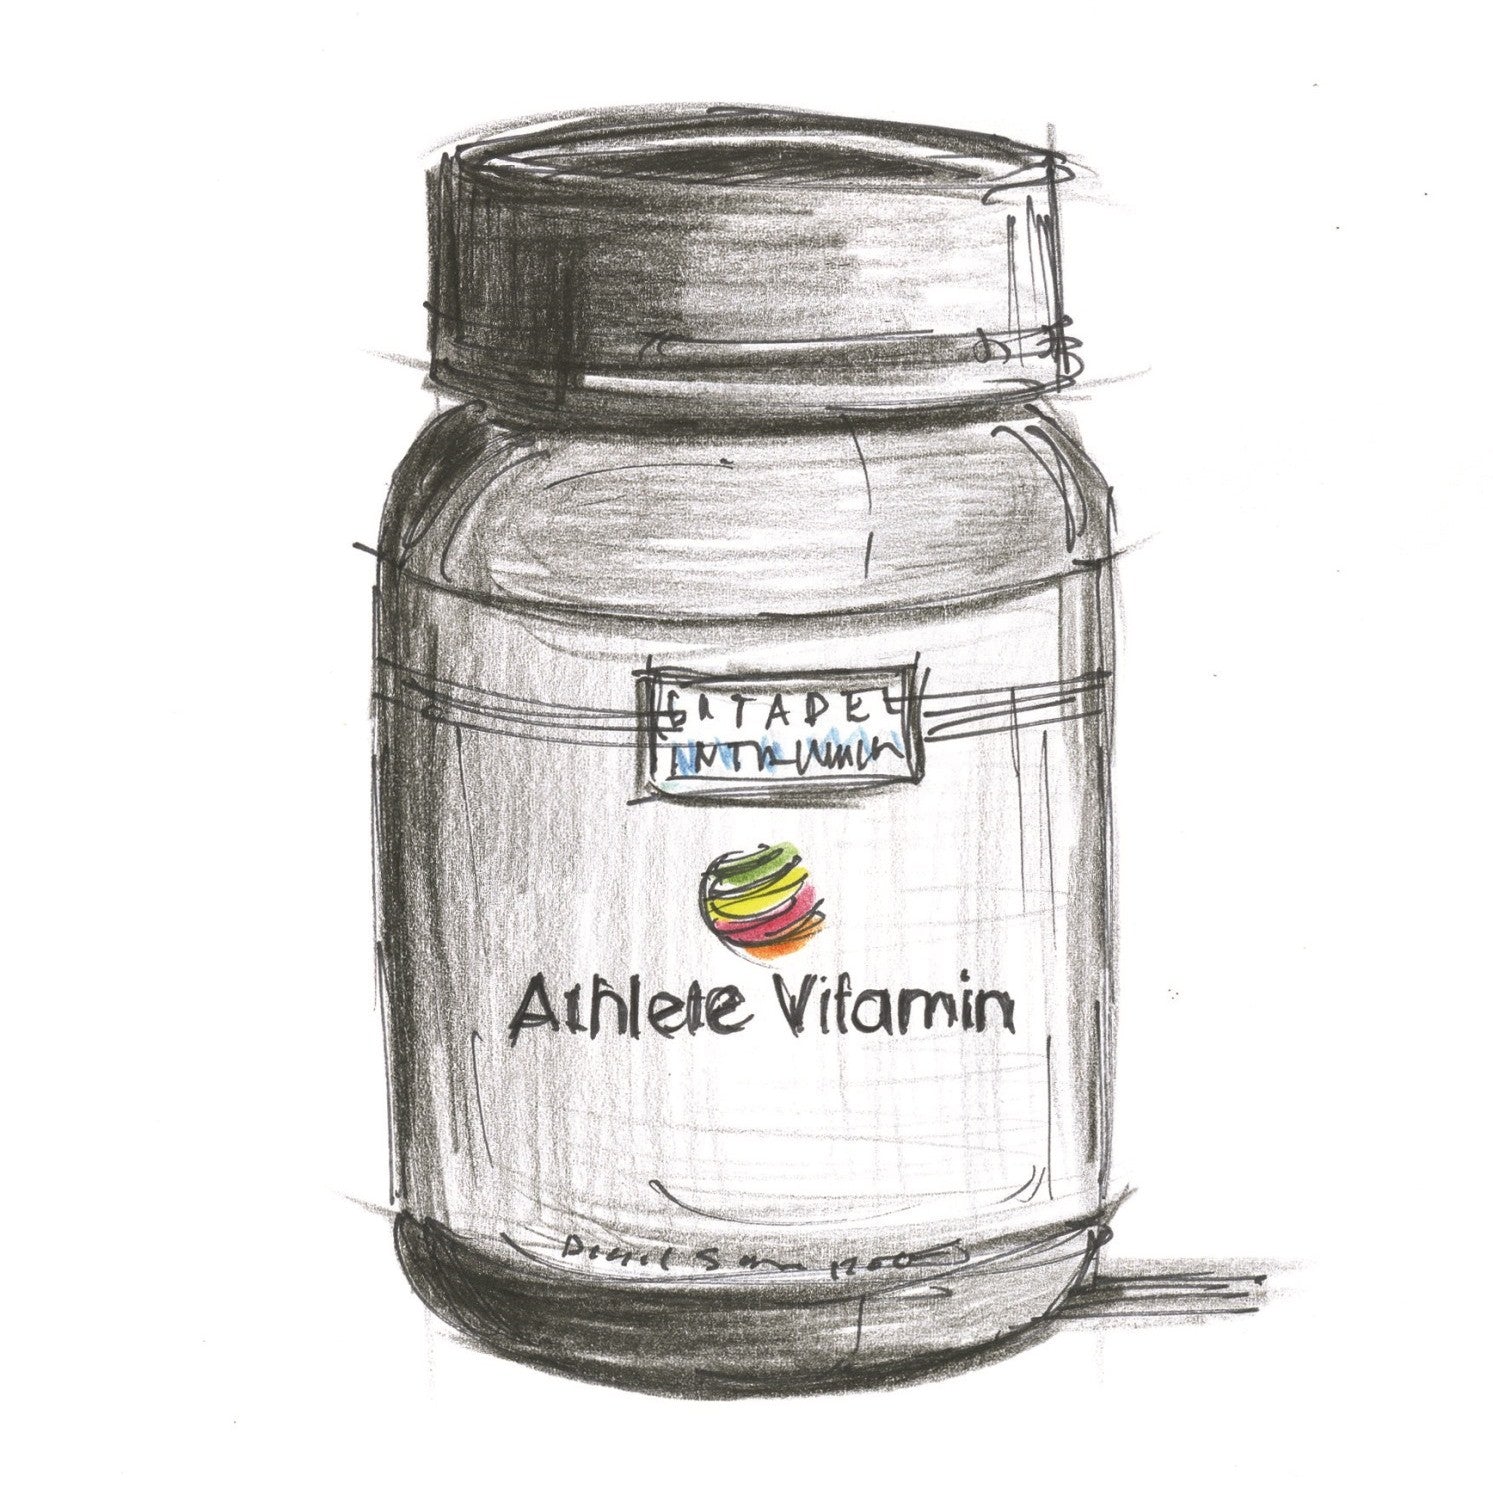 Athlete Vitamin Story. Part 1. A Fresh Approach.